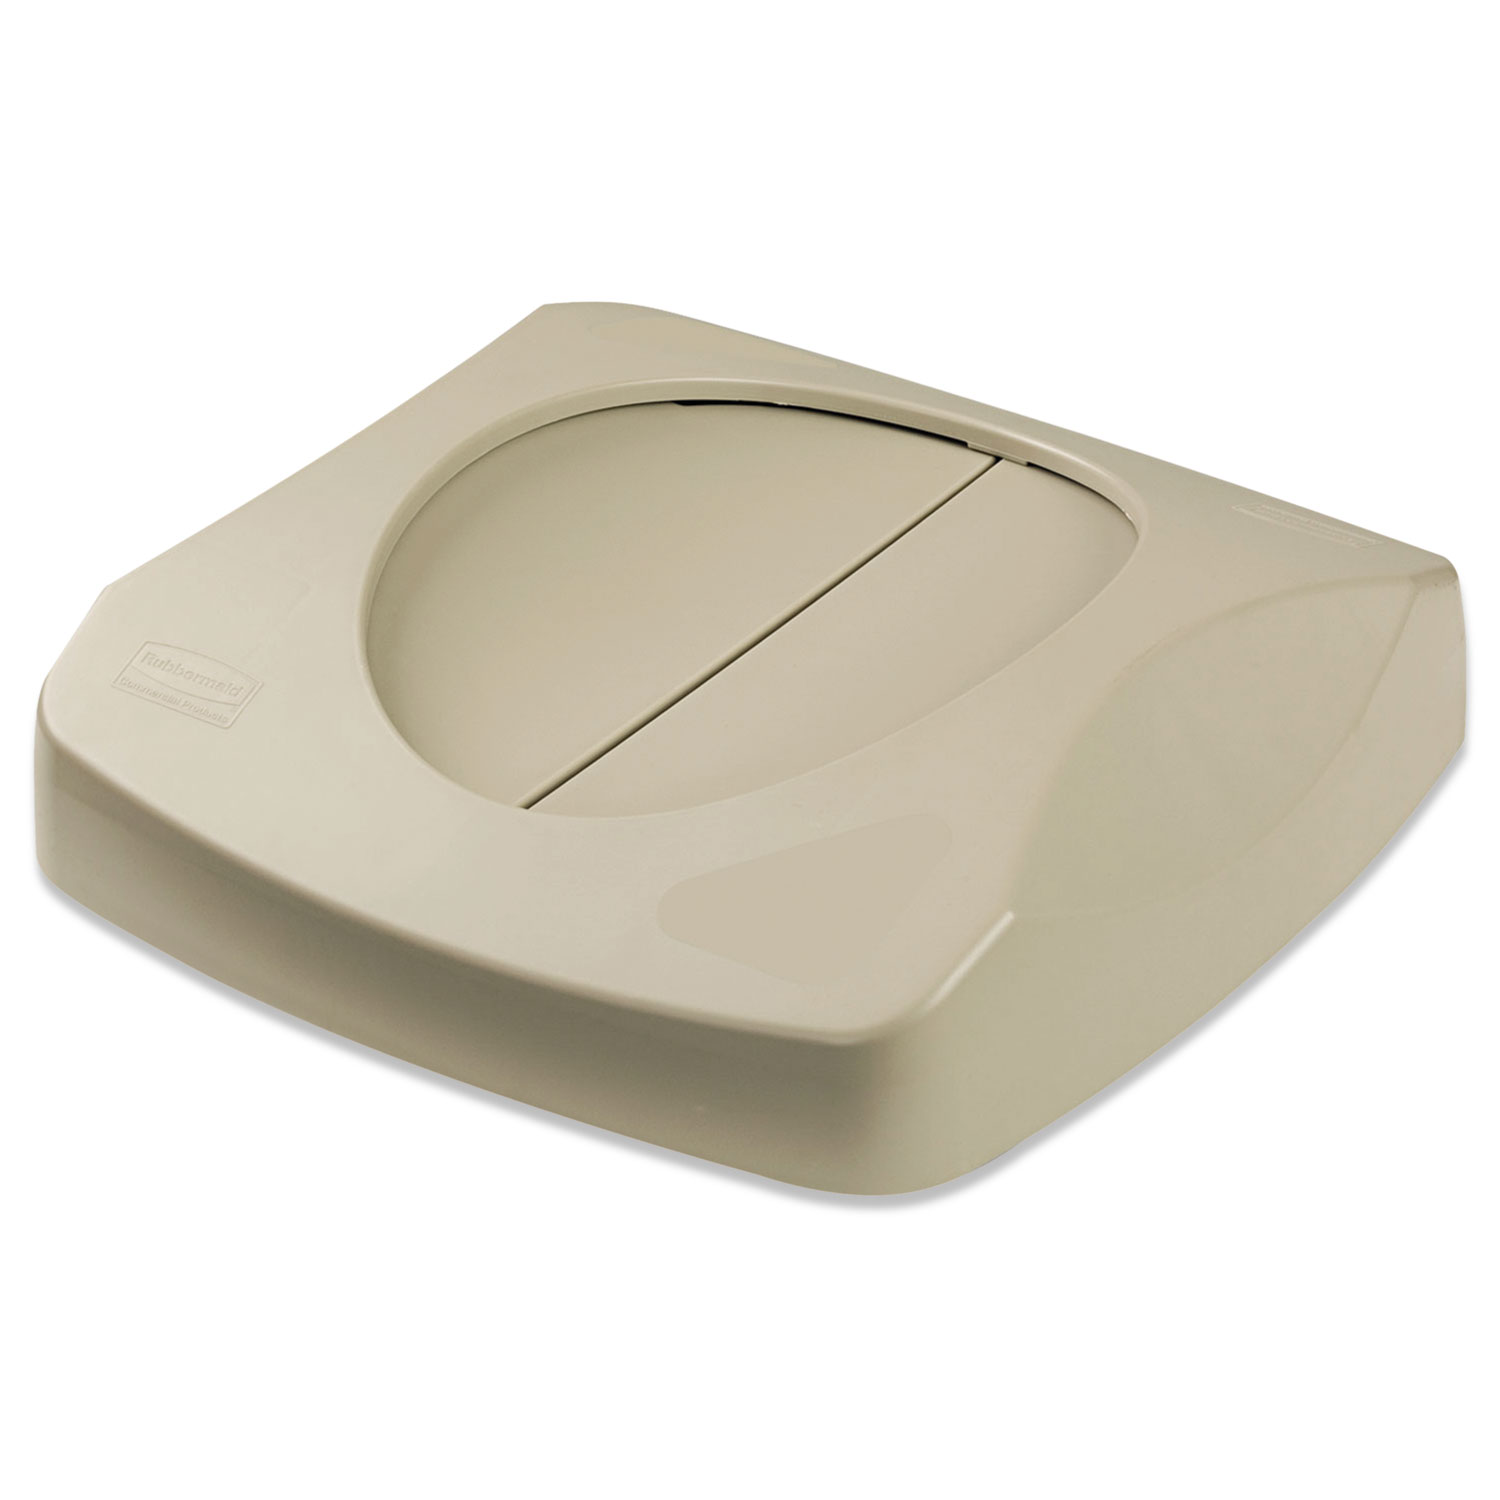  Rubbermaid Commercial FG268988BEIG Swing Top Lid for Untouchable Recycling Center, 16 Square, Beige (RCP268988BG) 